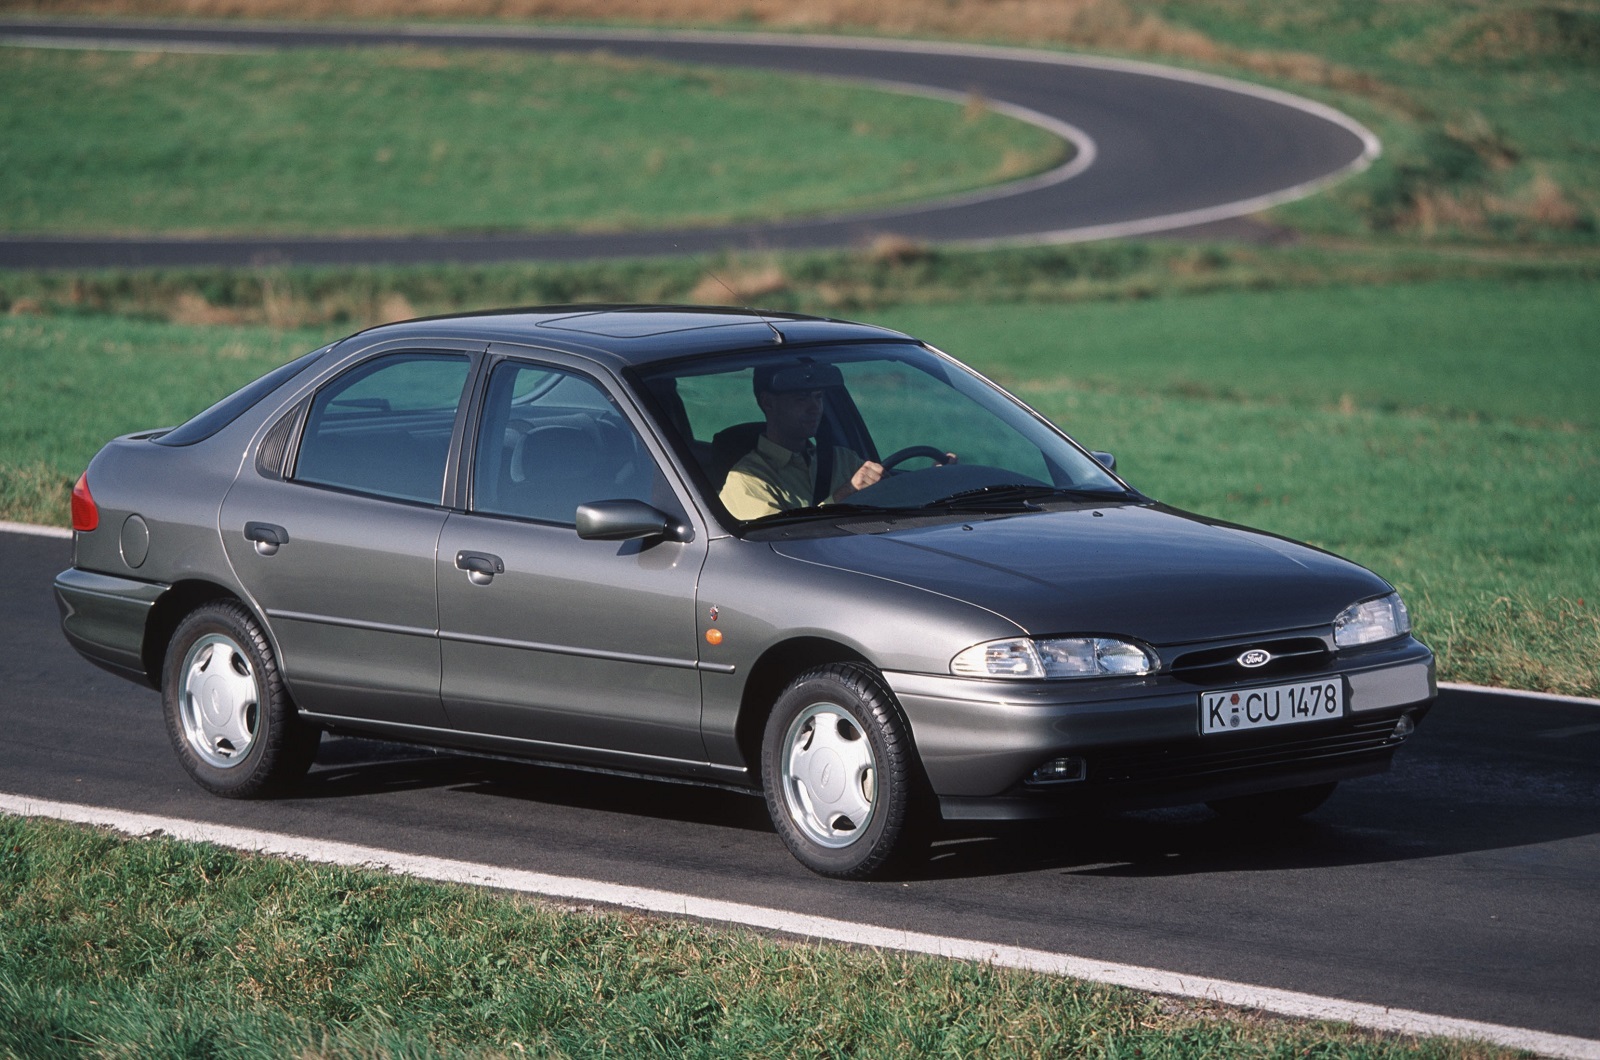 <p>Introduced in <strong>1992</strong>, and celebrated as a world car, the first-generation Mondeo played a significant role in propelling Ford of Europe to stardom during the 1990s. In the UK, it helped Ford outsell Vauxhall, its arch rival. It later became the <strong>Contour</strong> in America, and it spawned the <strong>Mercury Mystique</strong>. <strong>118,040 units</strong> of the Mondeo were sold in the UK in <strong>1995</strong>, a figure that placed it in third place behind the Escort and the Fiesta, and comfortably ahead of the Vauxhall Cavalier (<strong>73,978 sales</strong>). It was a company car, a family car, and a sports car when Ford added V6-powered ST-branded models to the line-up in the late 1990s.</p><p>Demand for the Mondeo gradually dropped during the 2000s; sales totalled <strong>57,589 units</strong> in 2005. It lost its world car vocation when Ford chose not to replace the Contour, but the Mondeo returned to the United States as the Fusion in 2012. Designing one saloon for two markets made sense, because sales were too low in each to justify making a country-specific car. By 2017, the Mondeo had fallen off the UK’s top-10 list, and the Fusion lingered in 19<sup>th</sup> spot with 209,623 sales, far behind its main rivals.</p>